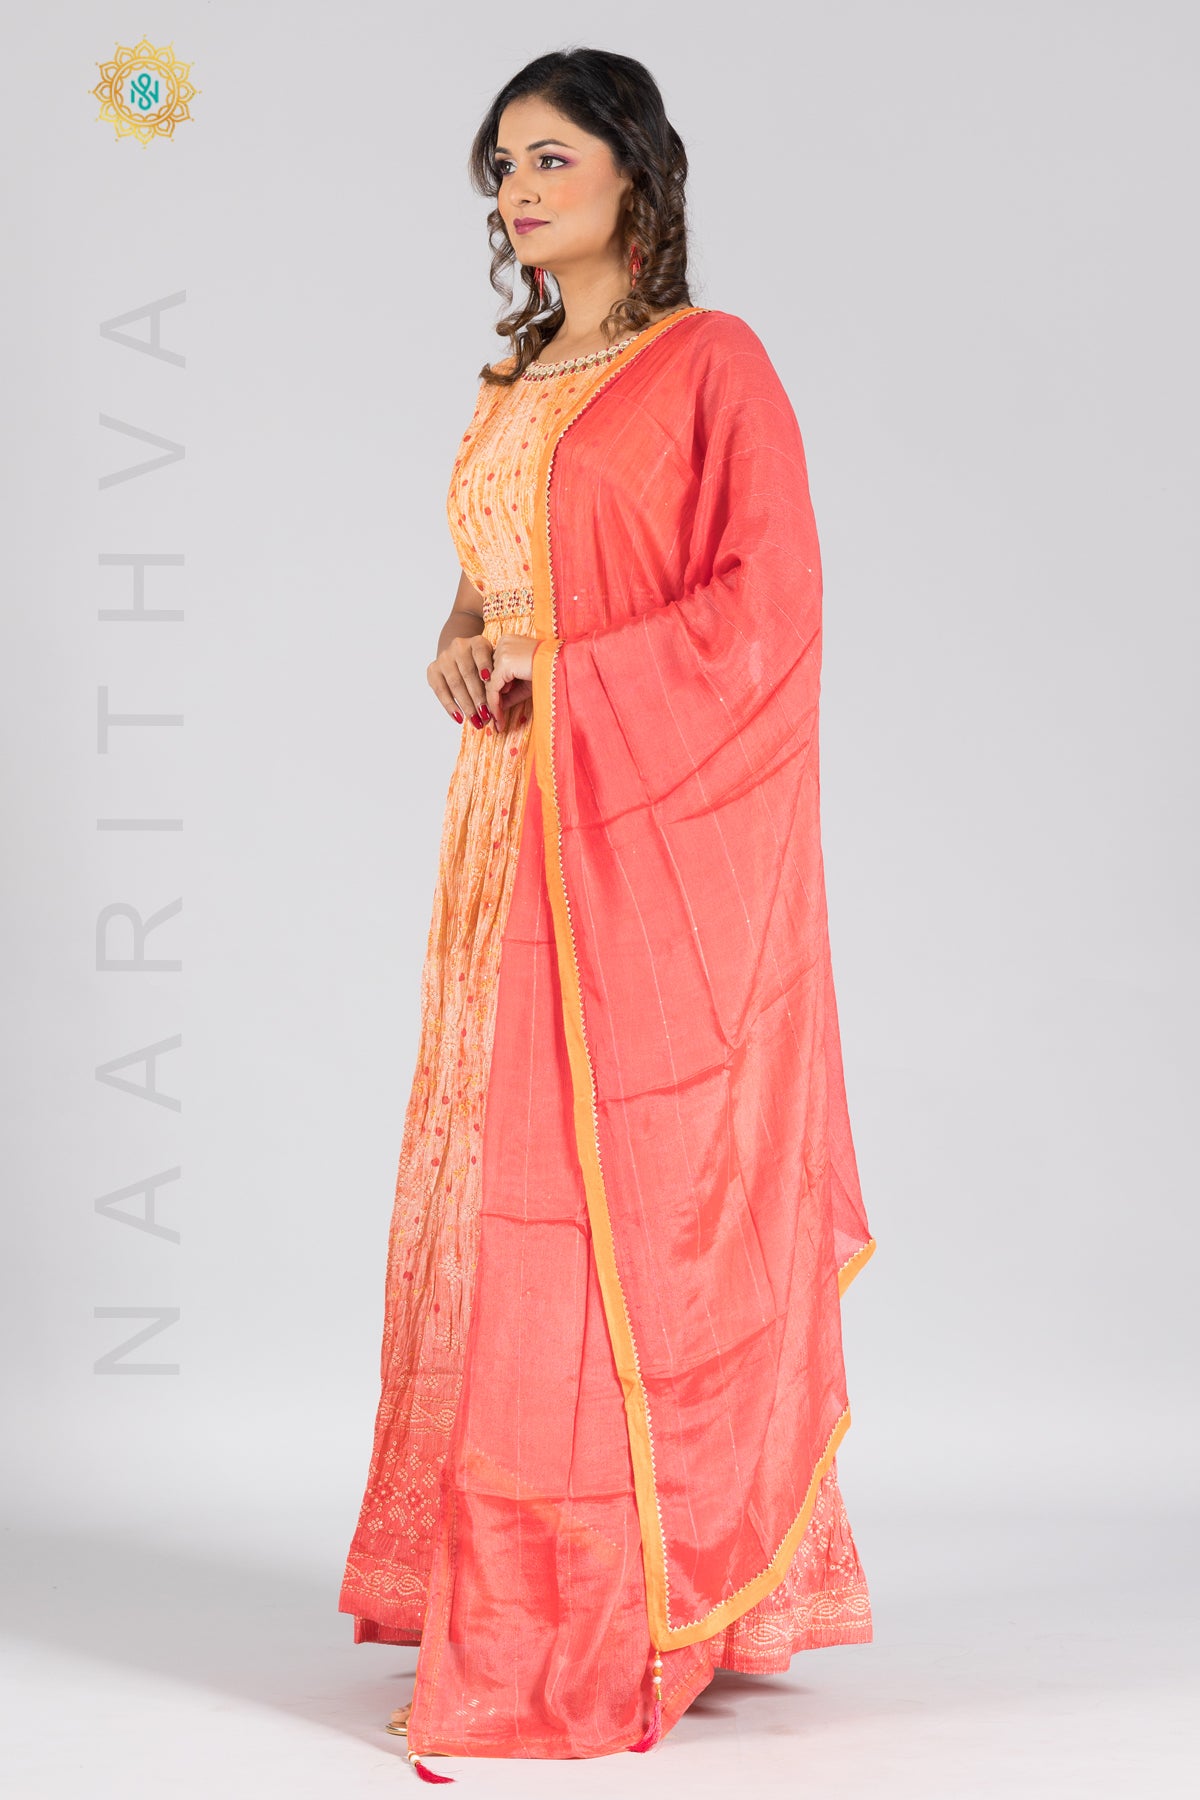 YELLOW WITH PEACH - PARTY WEAR GOWN WITH NECK LINE HAND WORK & DUPATTA